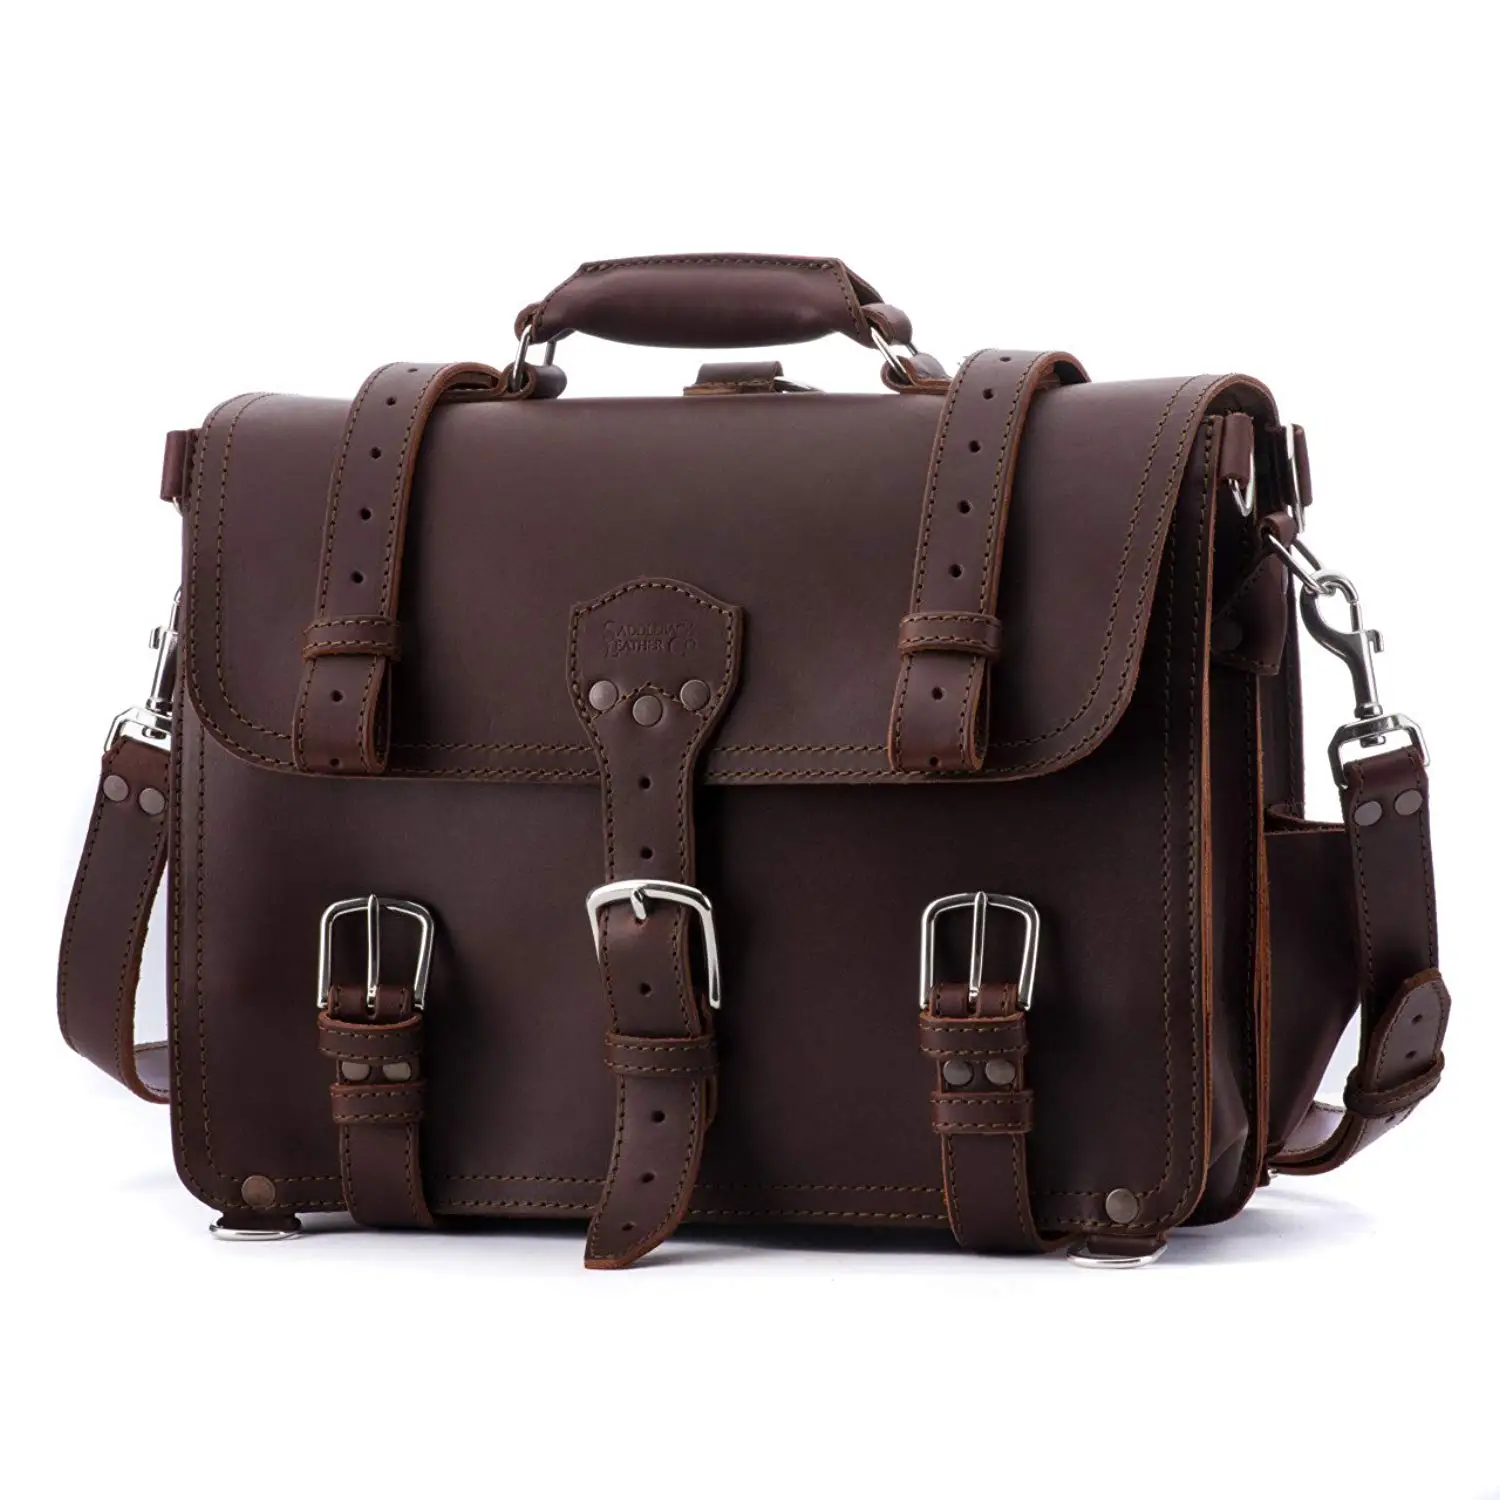 Buy Saddleback Leather Co. Classic Leather Briefcase The Original Full Grain Leather Briefcase ...